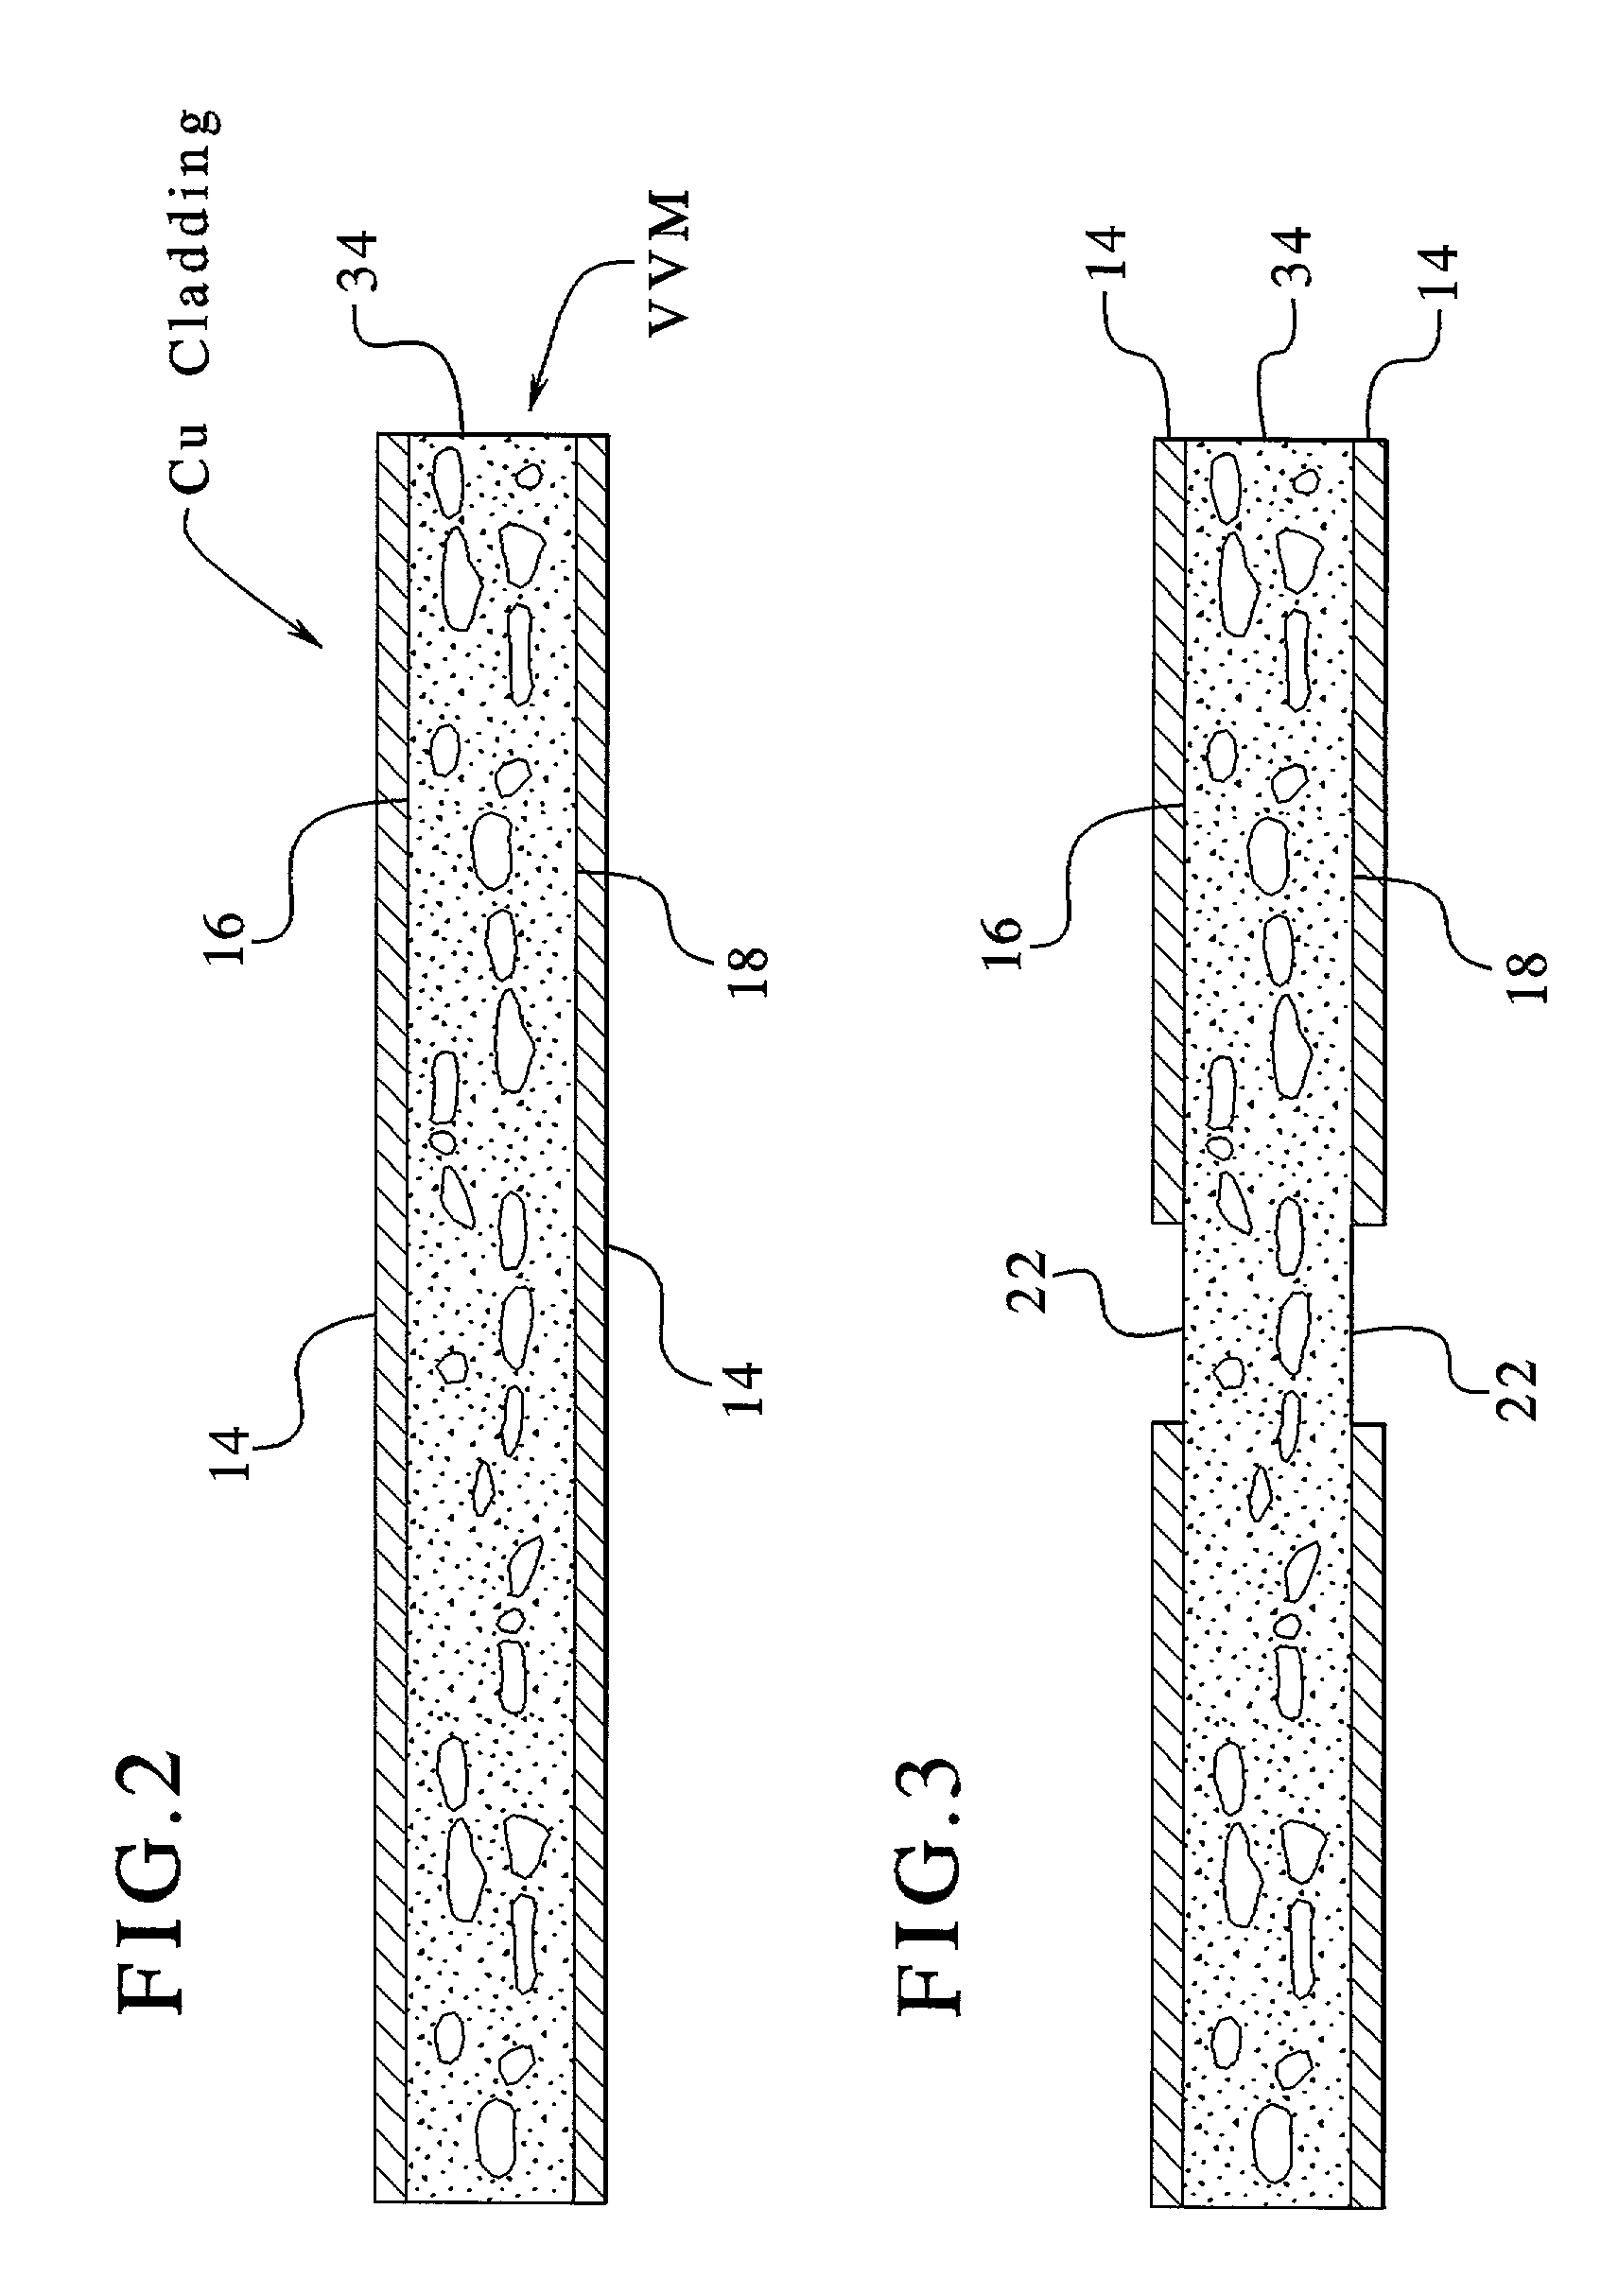 Voltage variable substrate material